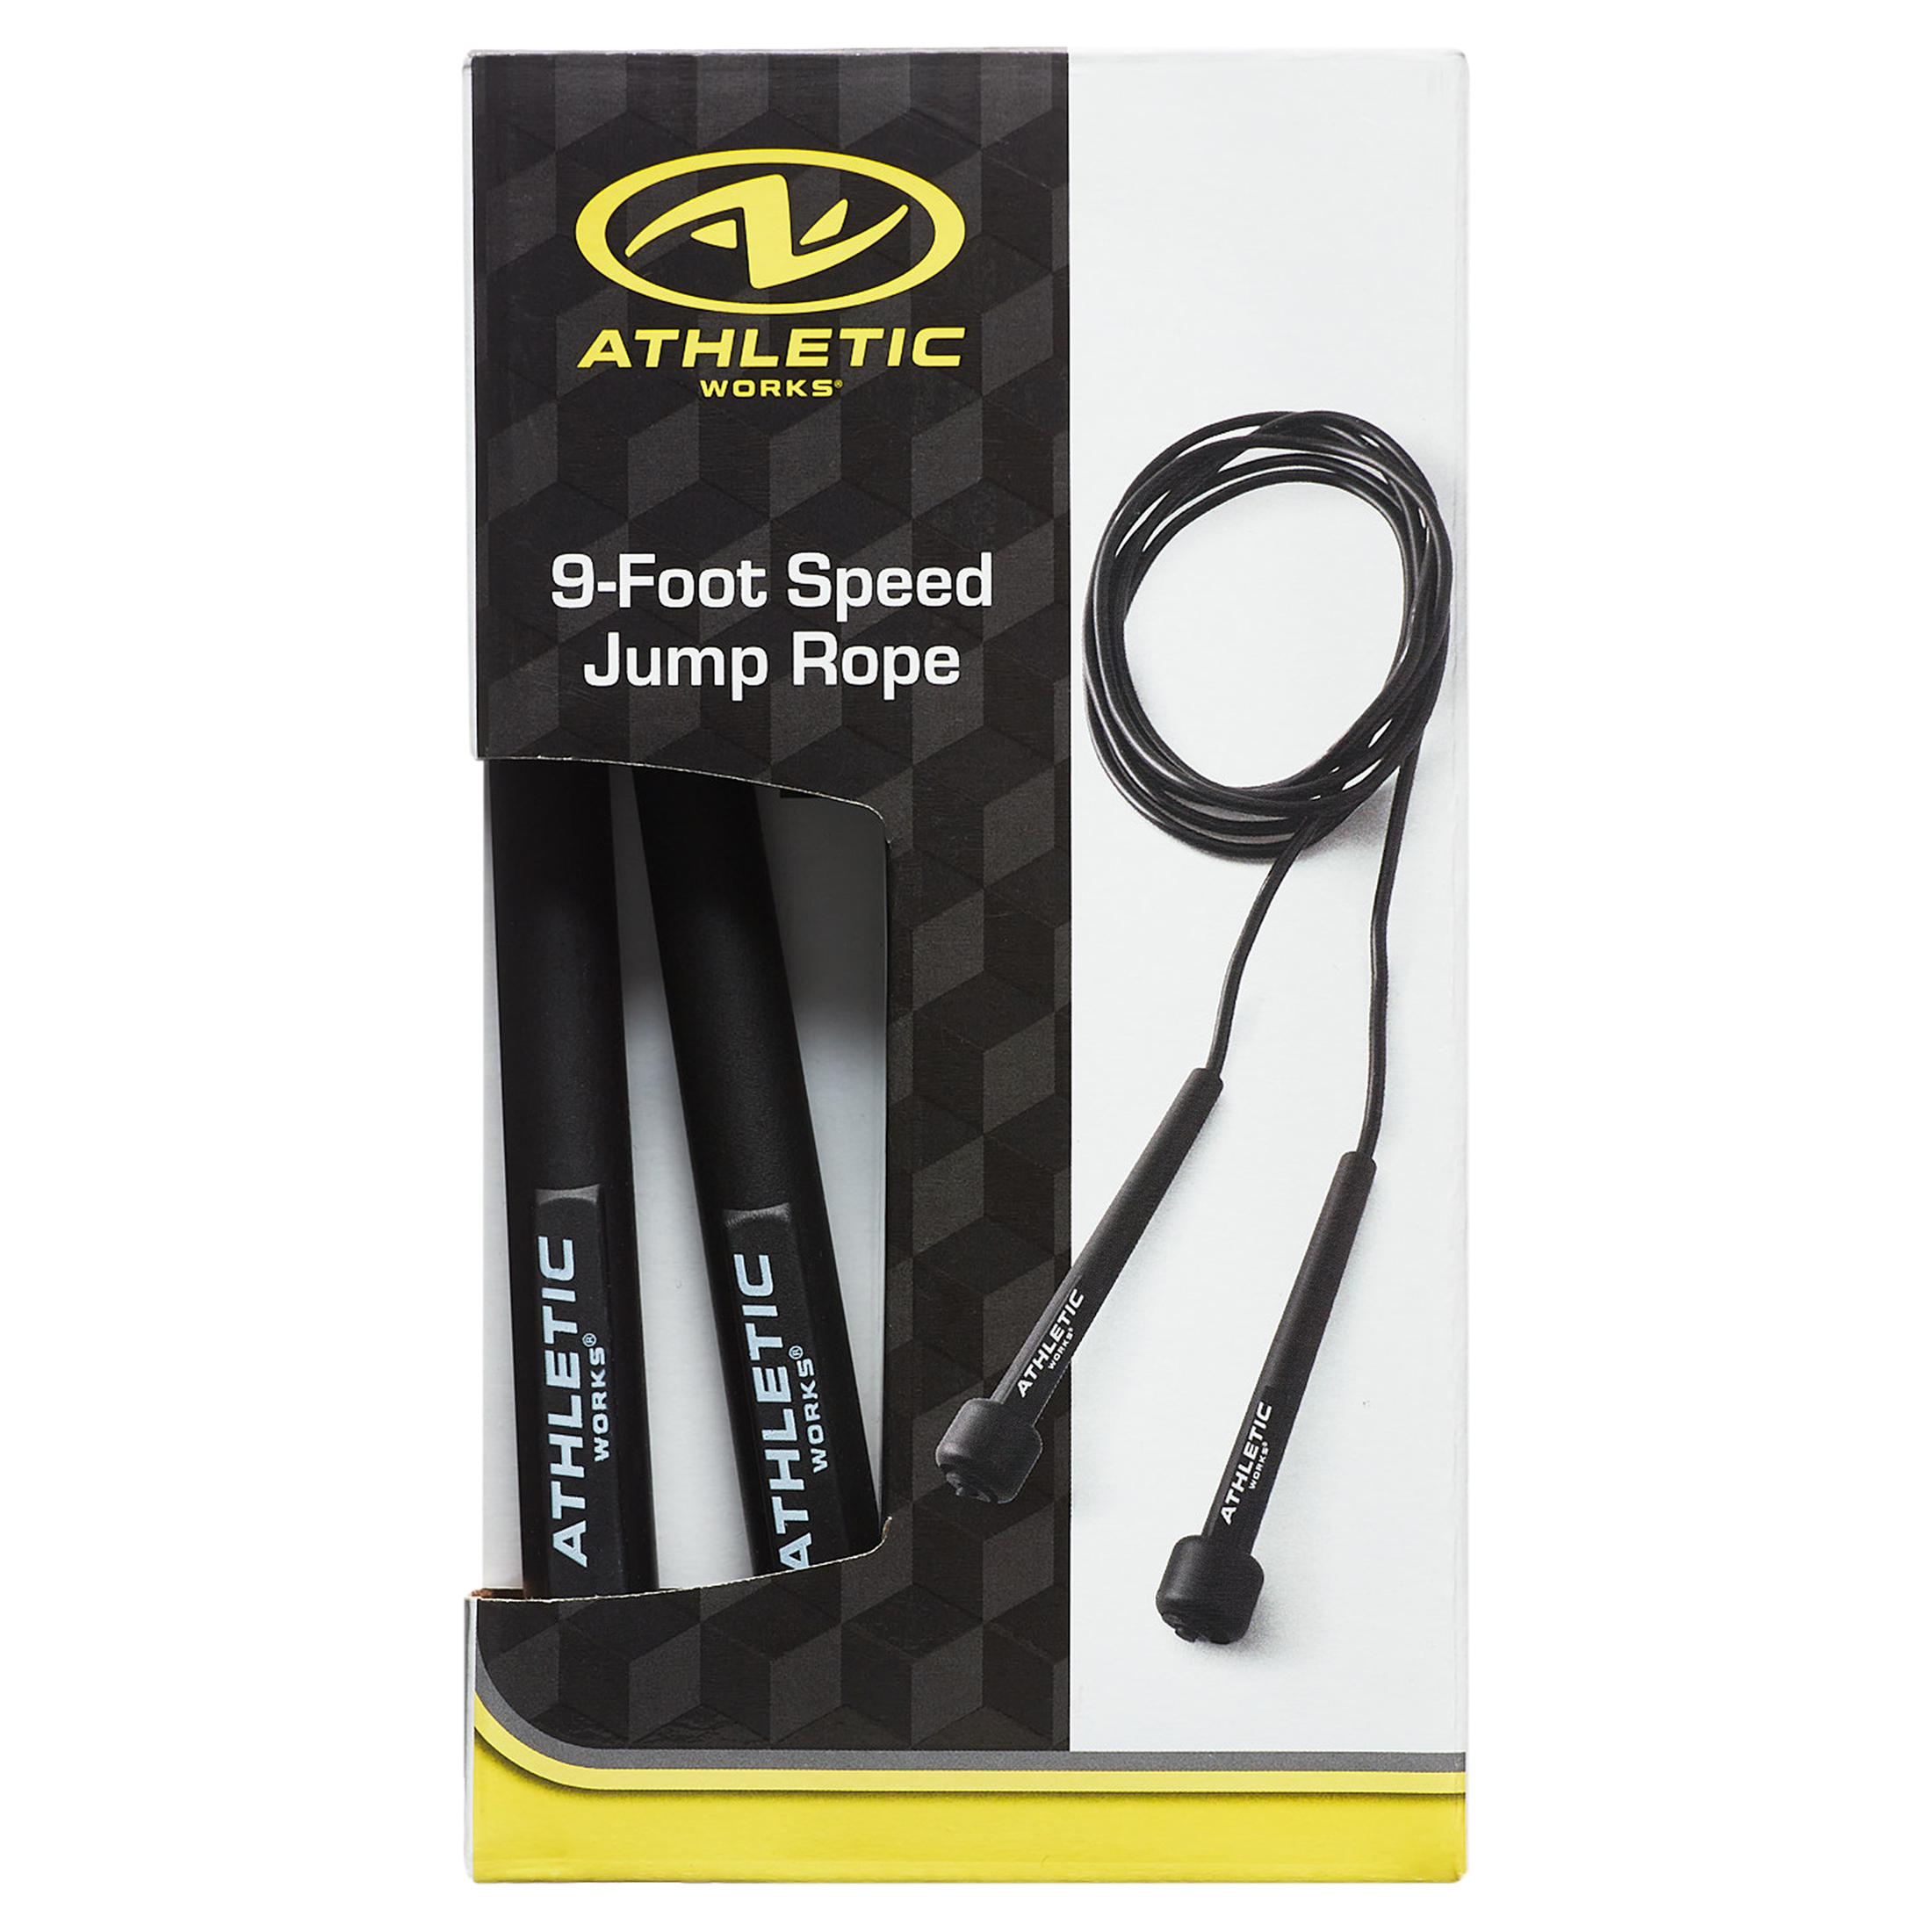 Athletic Works Speed Jump Rope with Light Weight Handles, 9' Length, Black - image 2 of 7